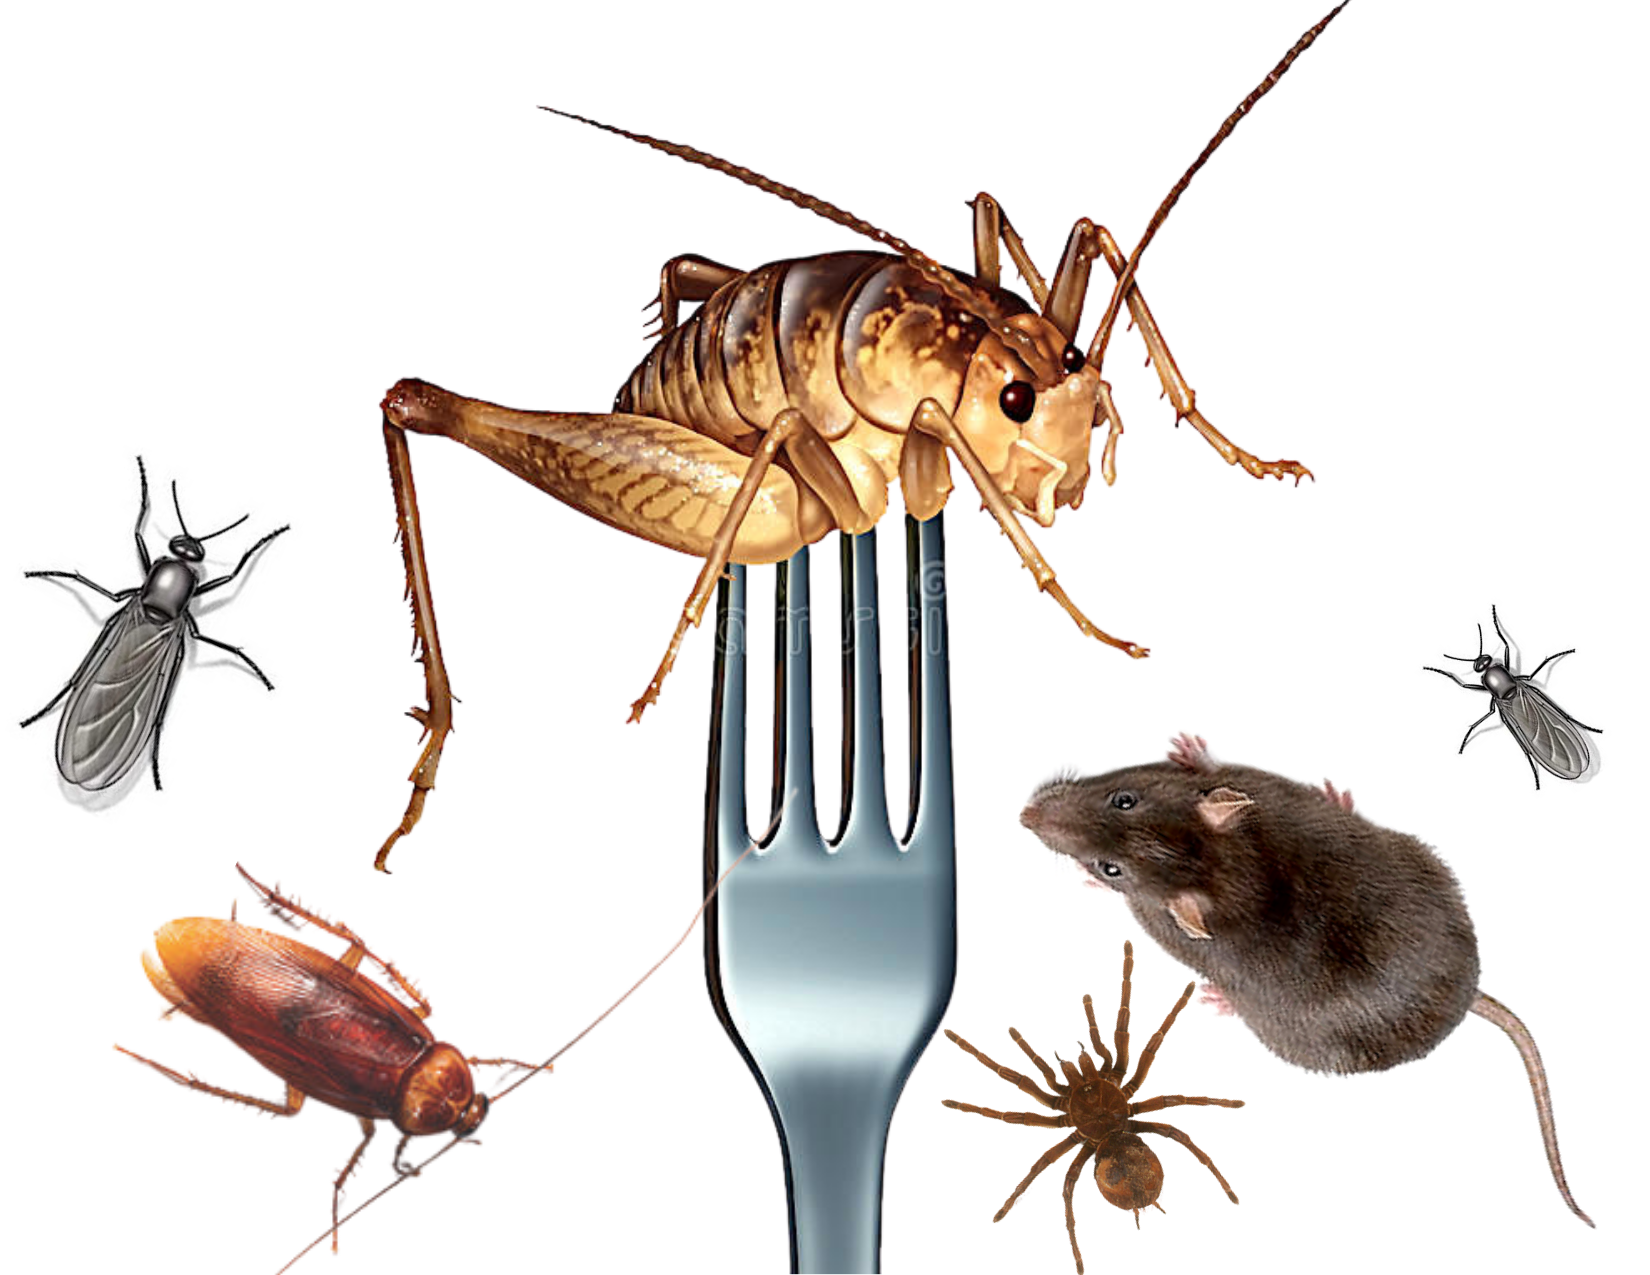 BUGS, RAT HAIRS AND RODENT POOP IS IN YOUR FOOD!